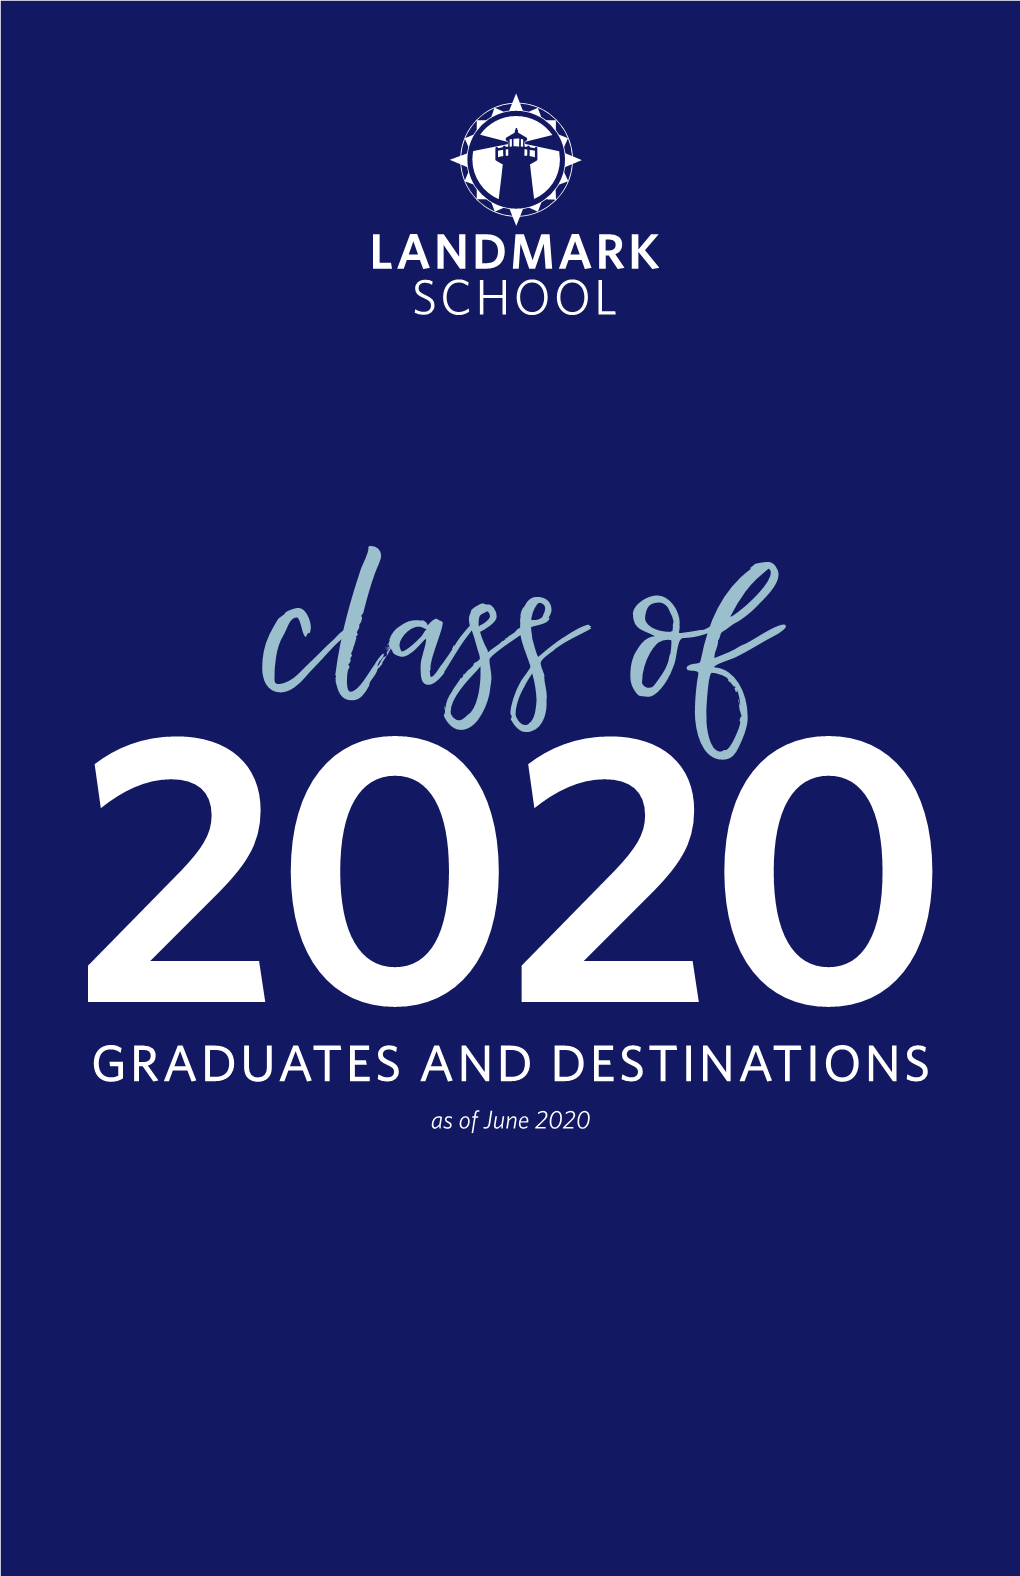 GRADUATES and DESTINATIONS As of June 2020 We Honor Landmark’S Class of 2020 for Their Spirit, Strength, and Optimism